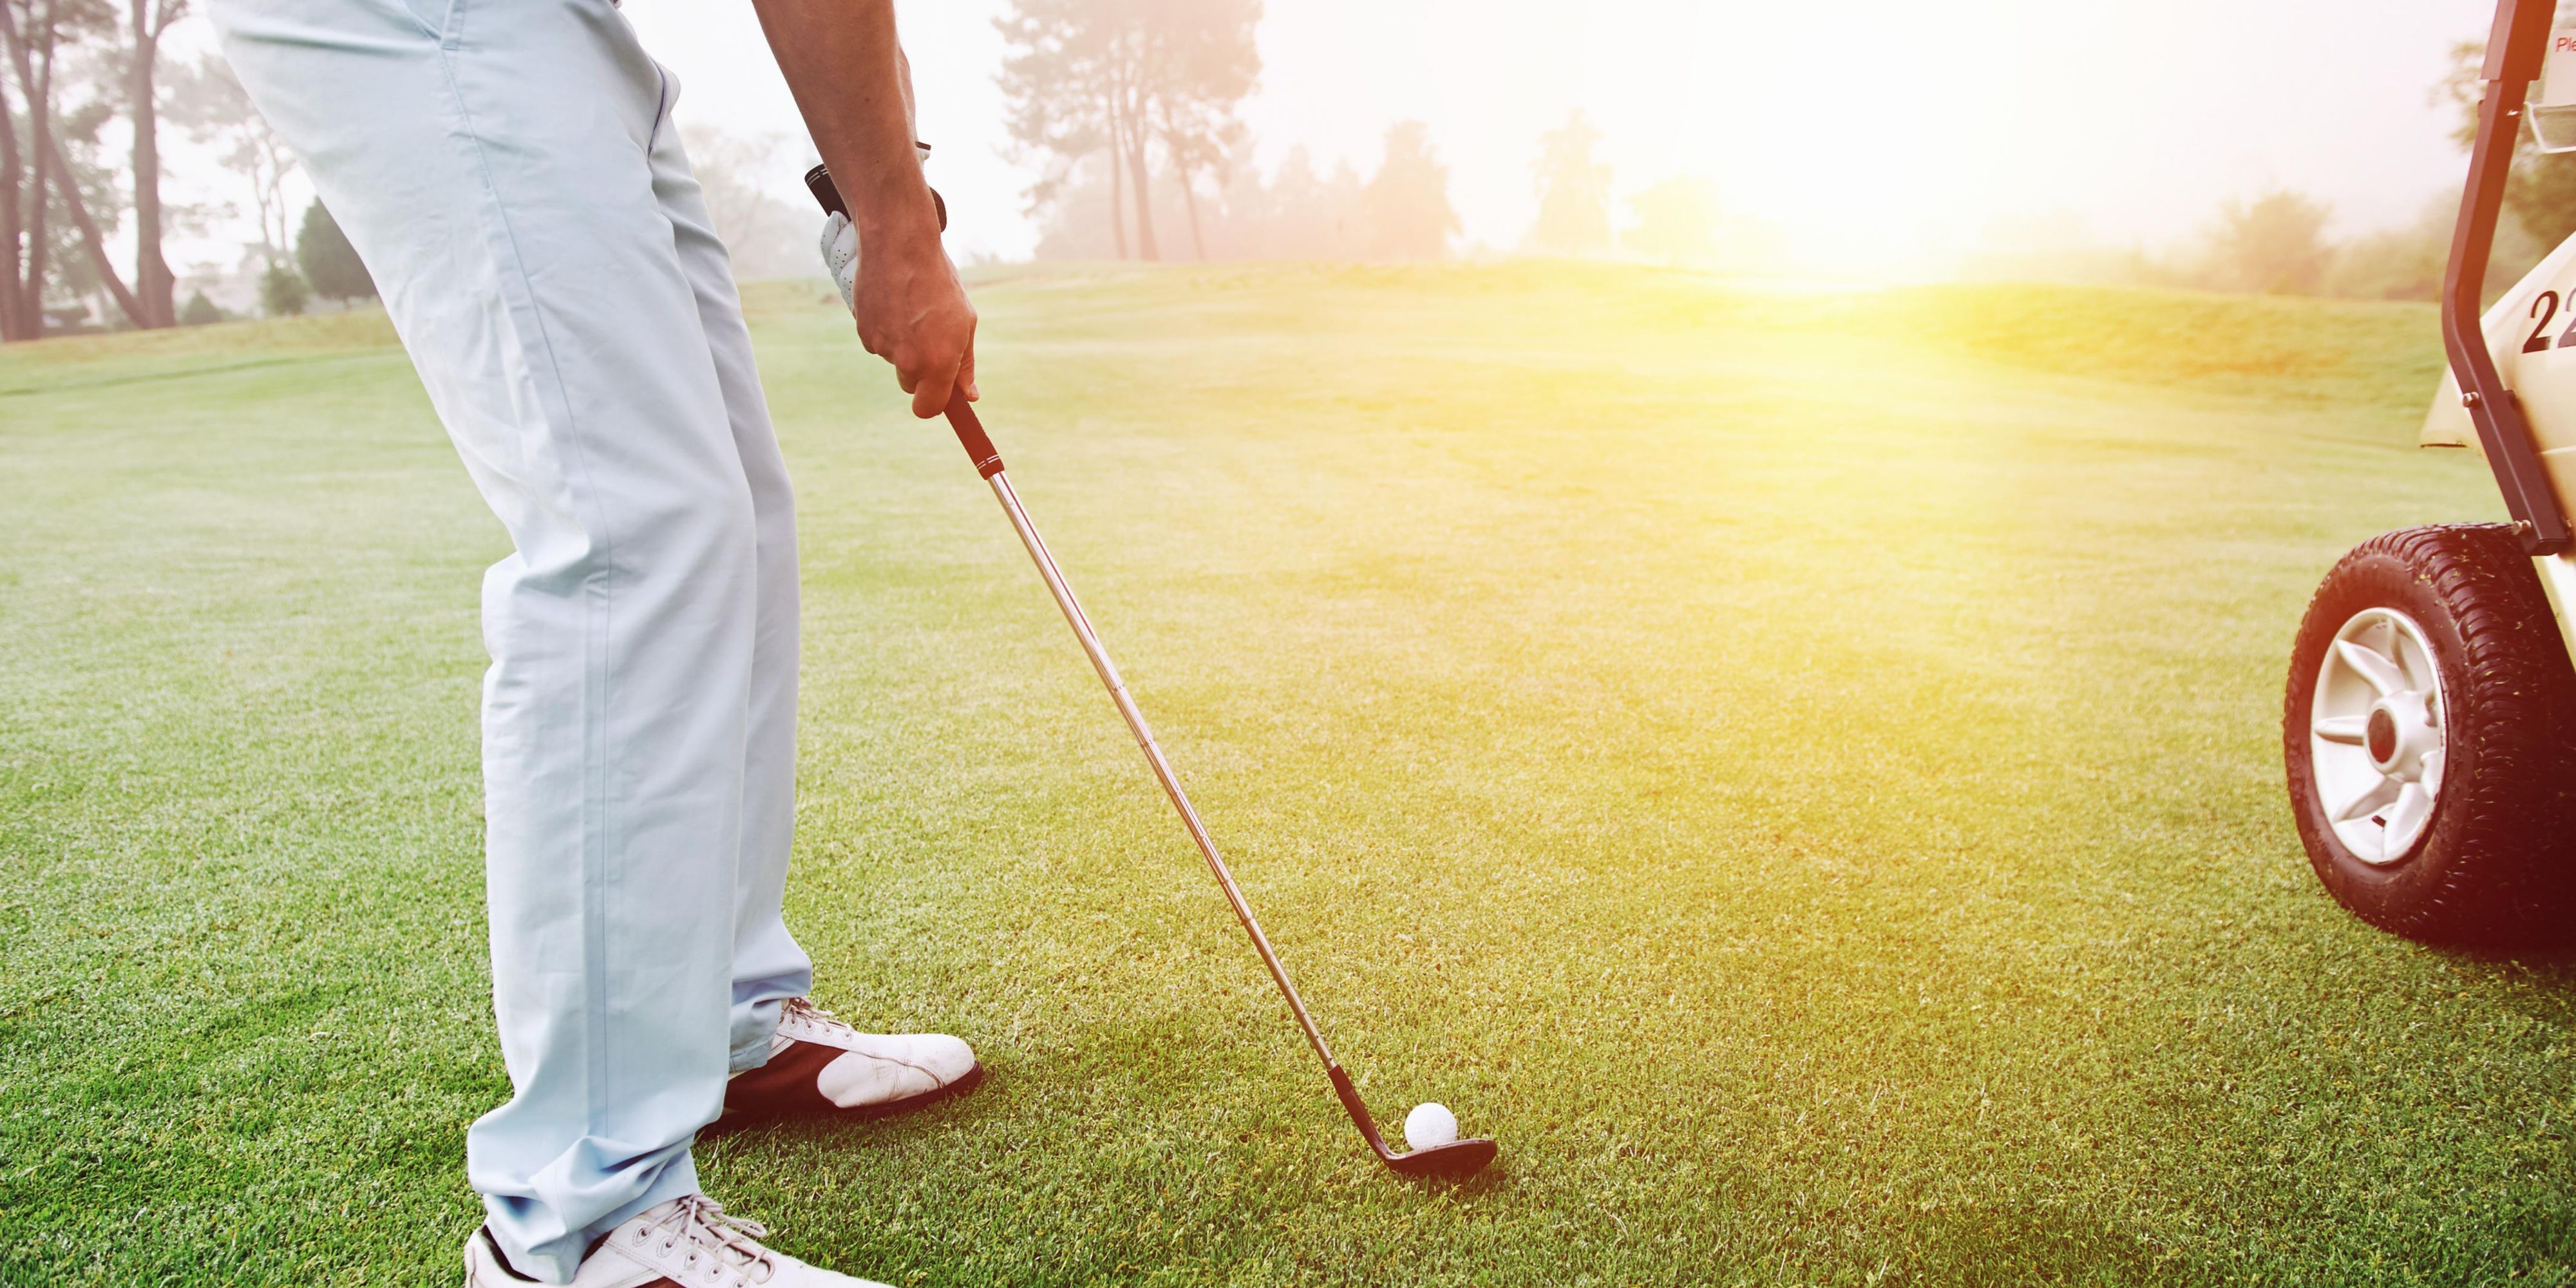 Enjoy a round of golf at near by courses like Geneva National and Evergreen Country Club, just minutes from the hotel! 